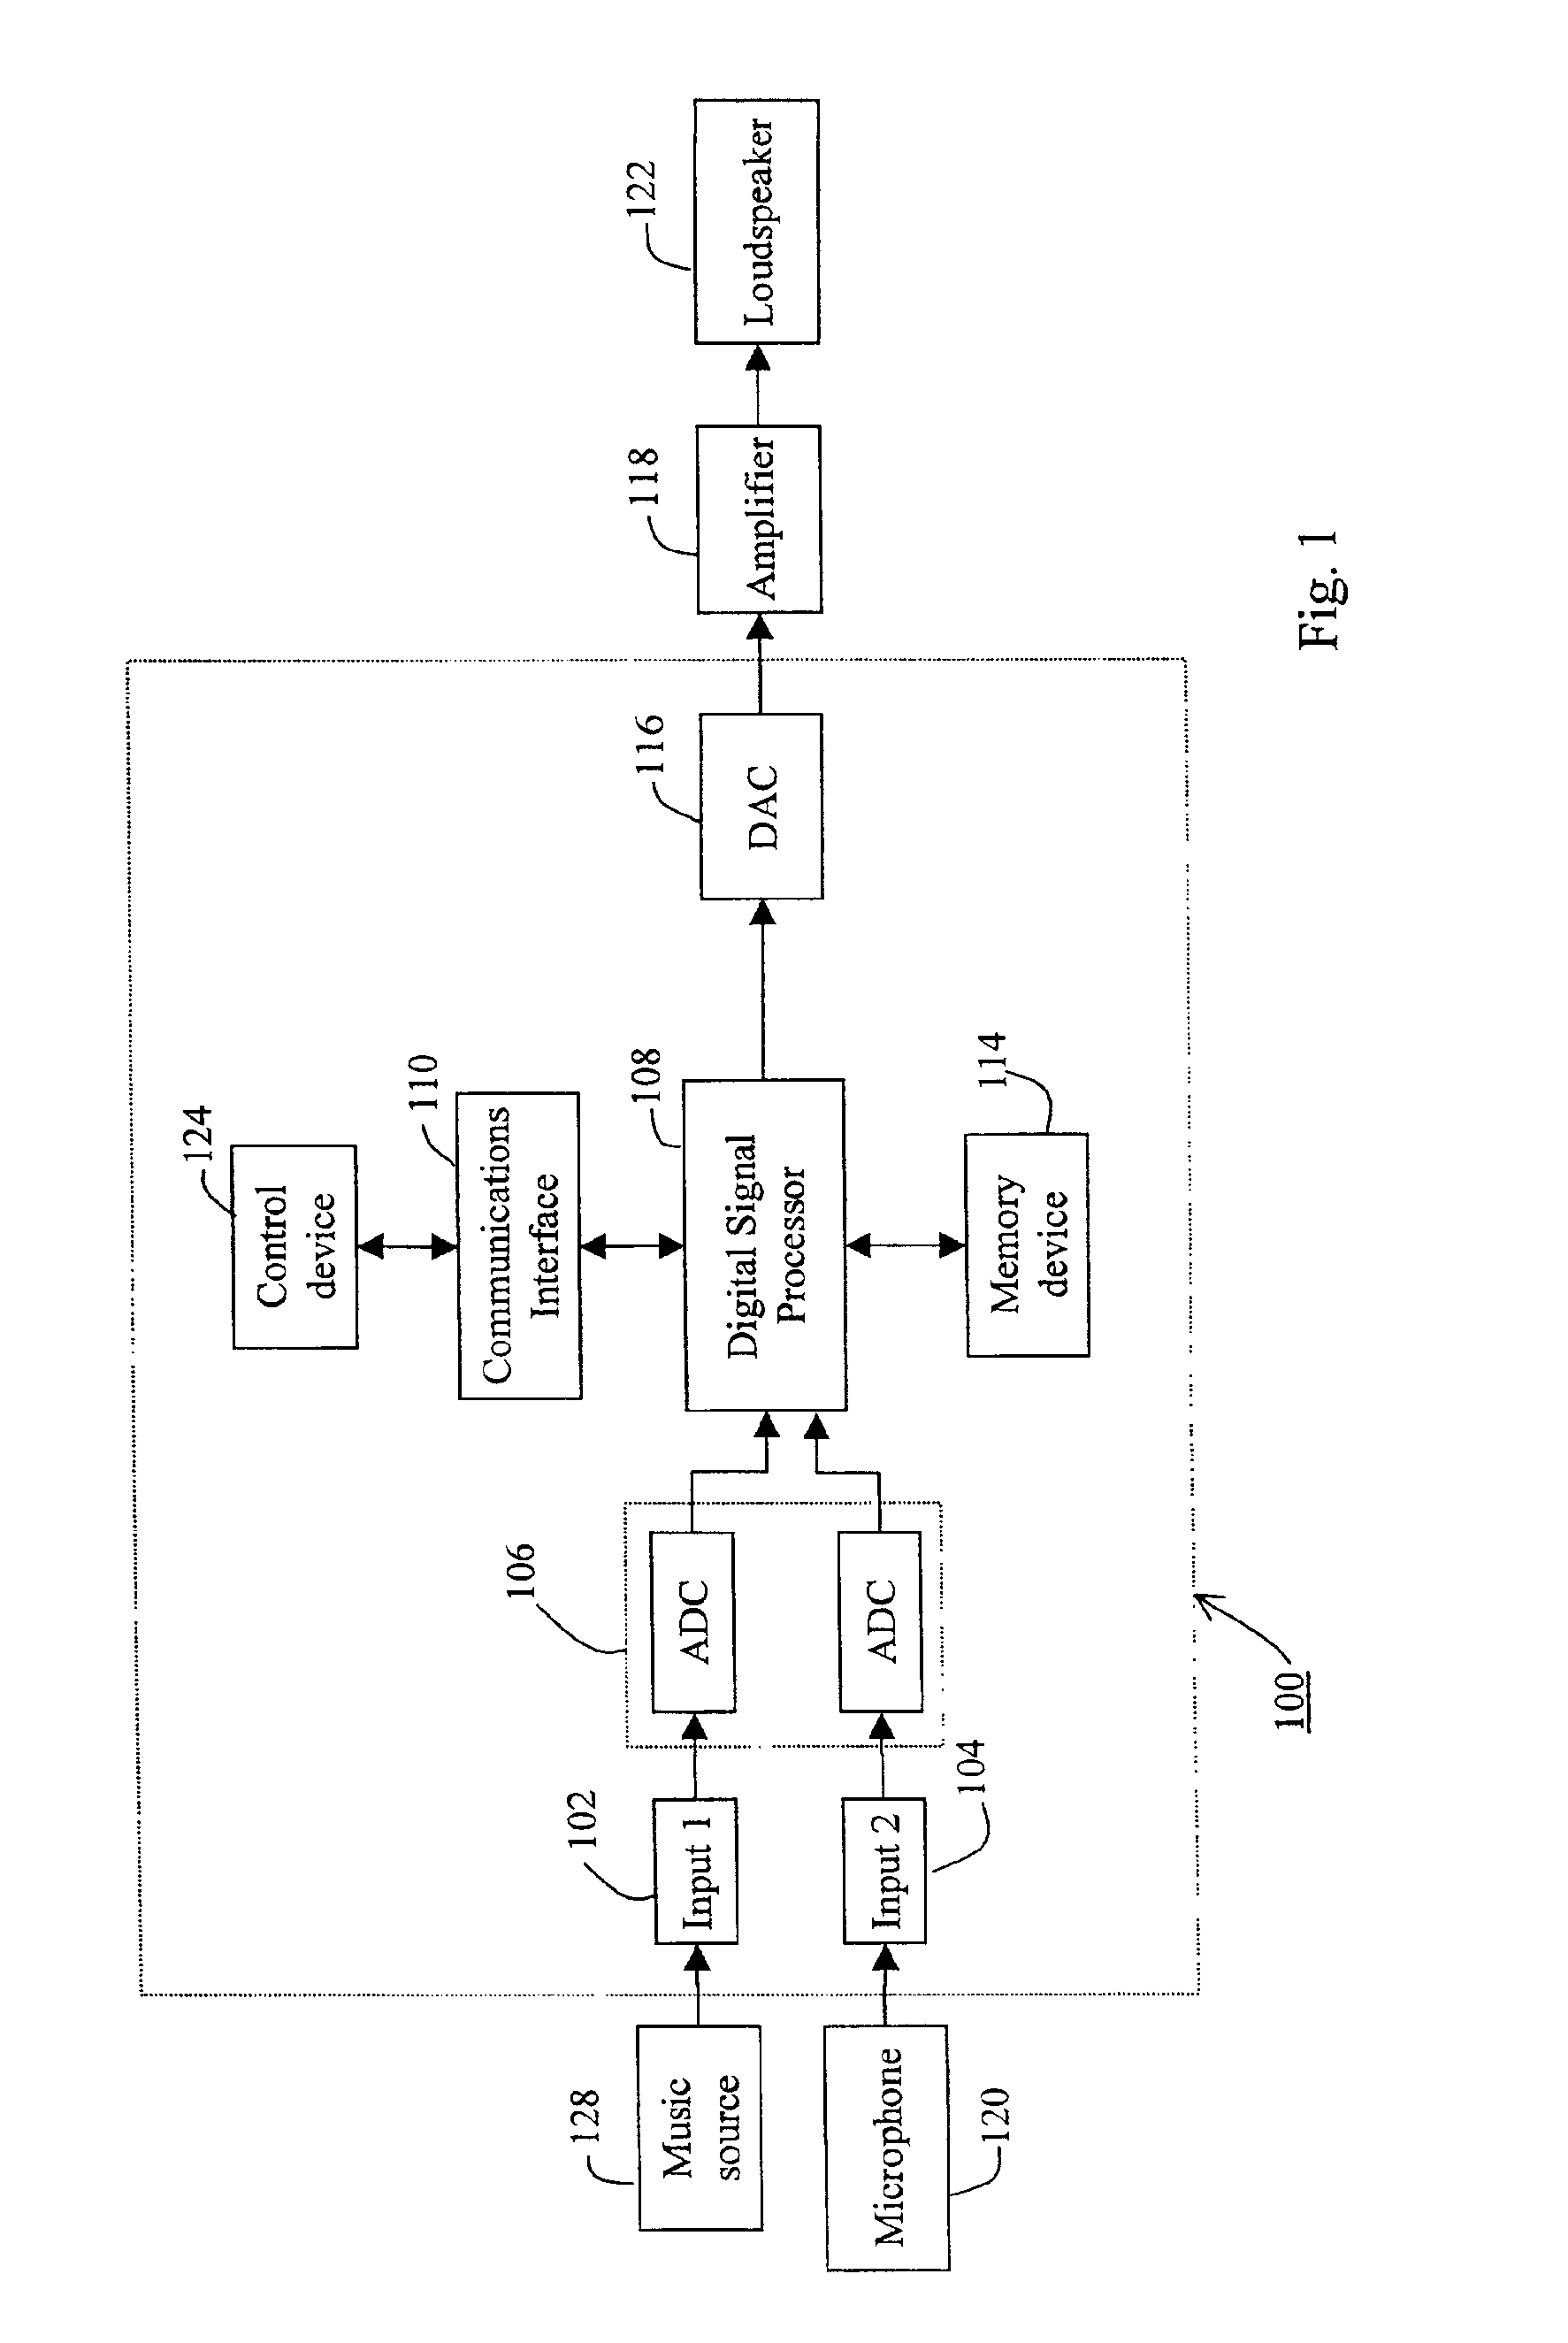 Method and apparatus for automatic volume control in an audio system